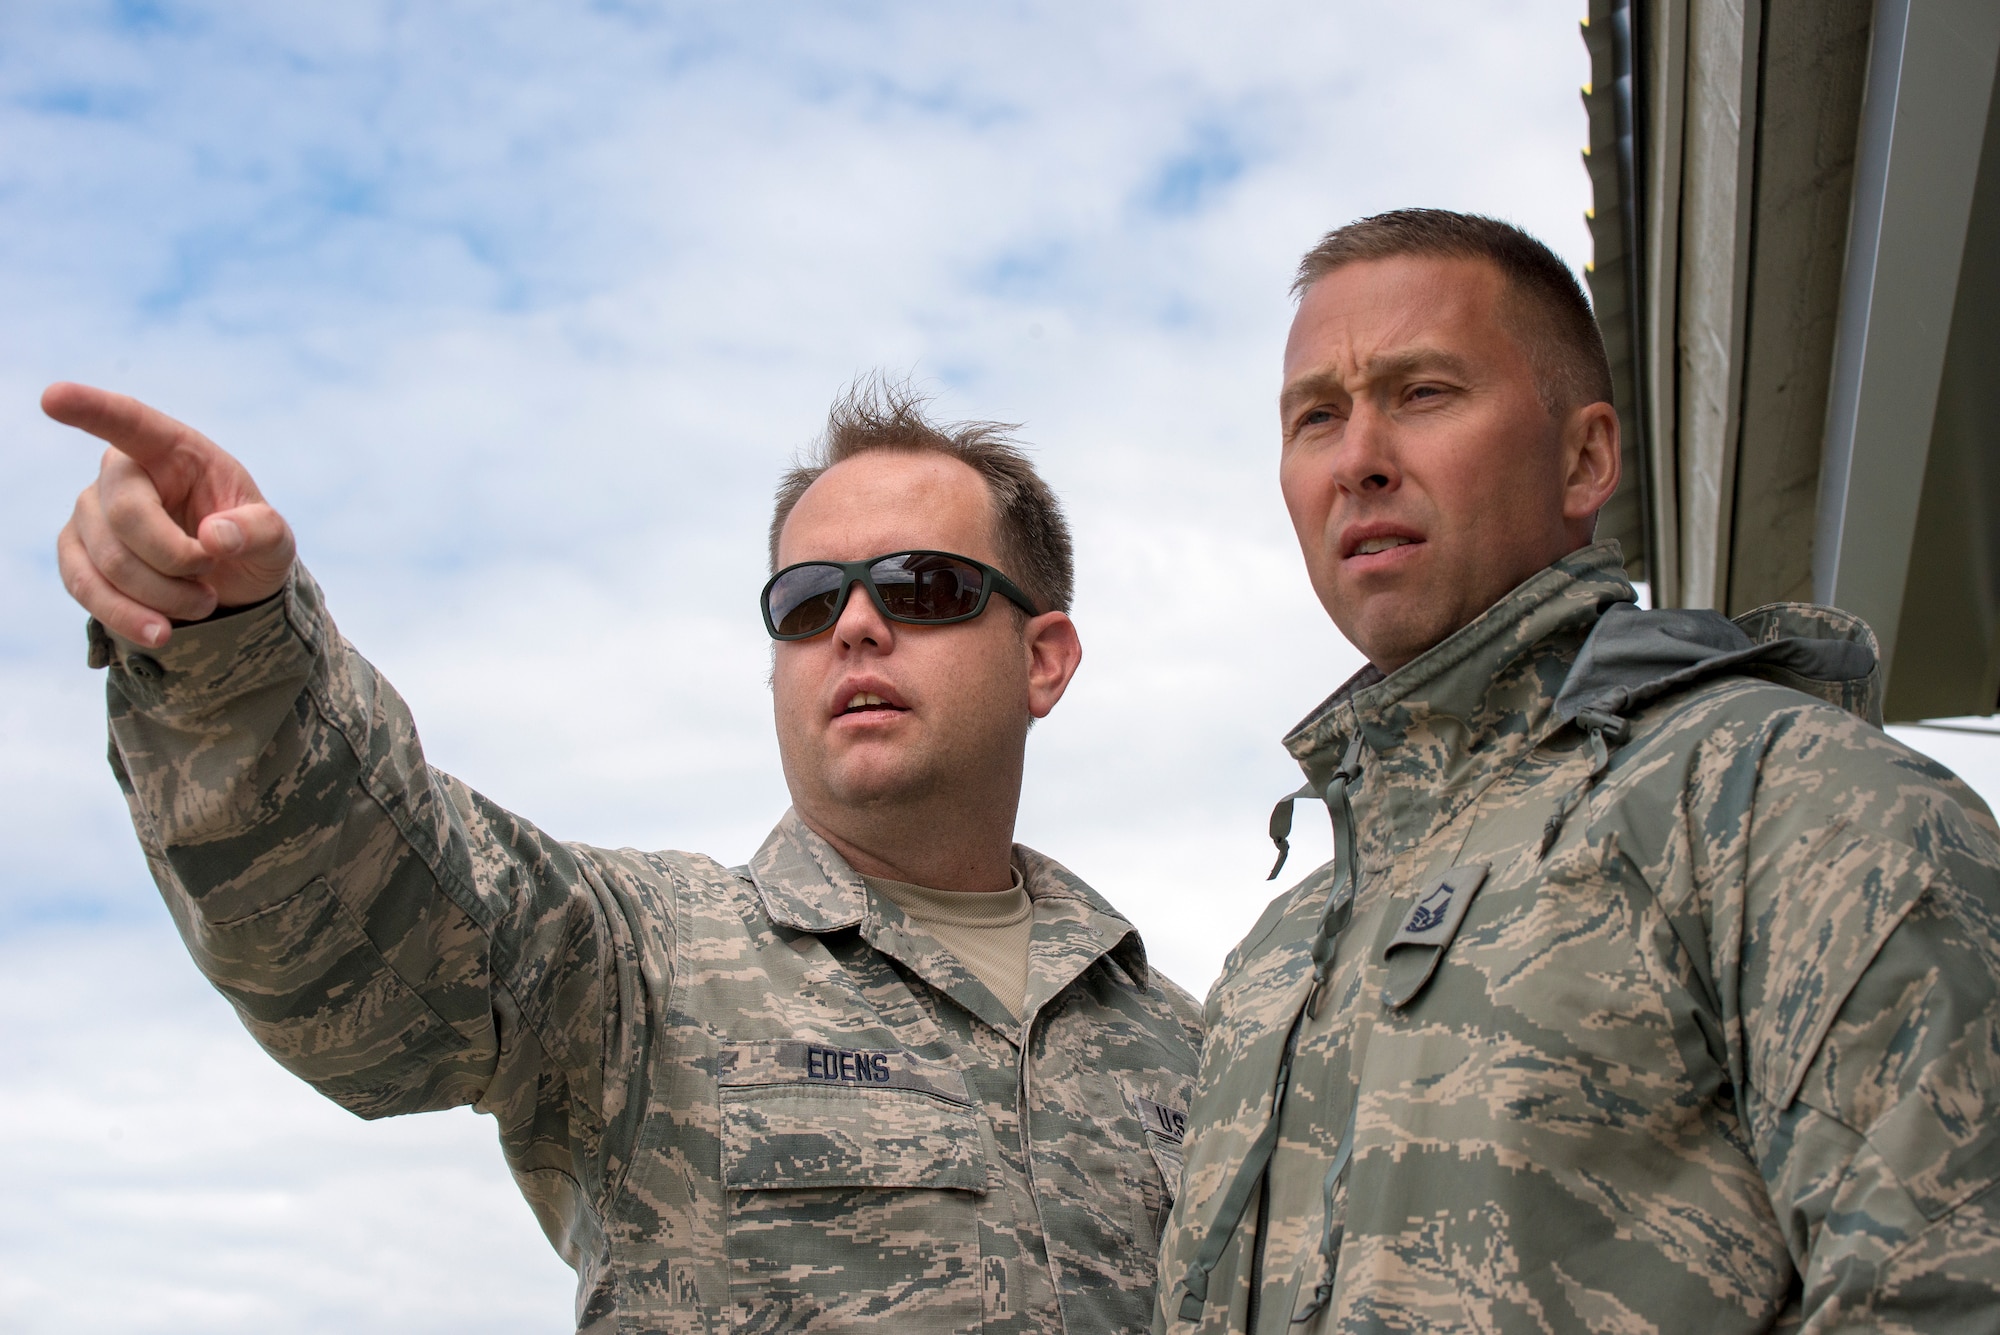 Master Sgt’s Preston Edens, a range controller and Luke Vanderwerf, a first sergeant, both from the 140th Wing, Colorado Air National Guard out of Buckley Air Force Base, discuss targets for aircraft at Papa Range, Estonia, in support of exercise Trojan Footprint, June 6, 2018.